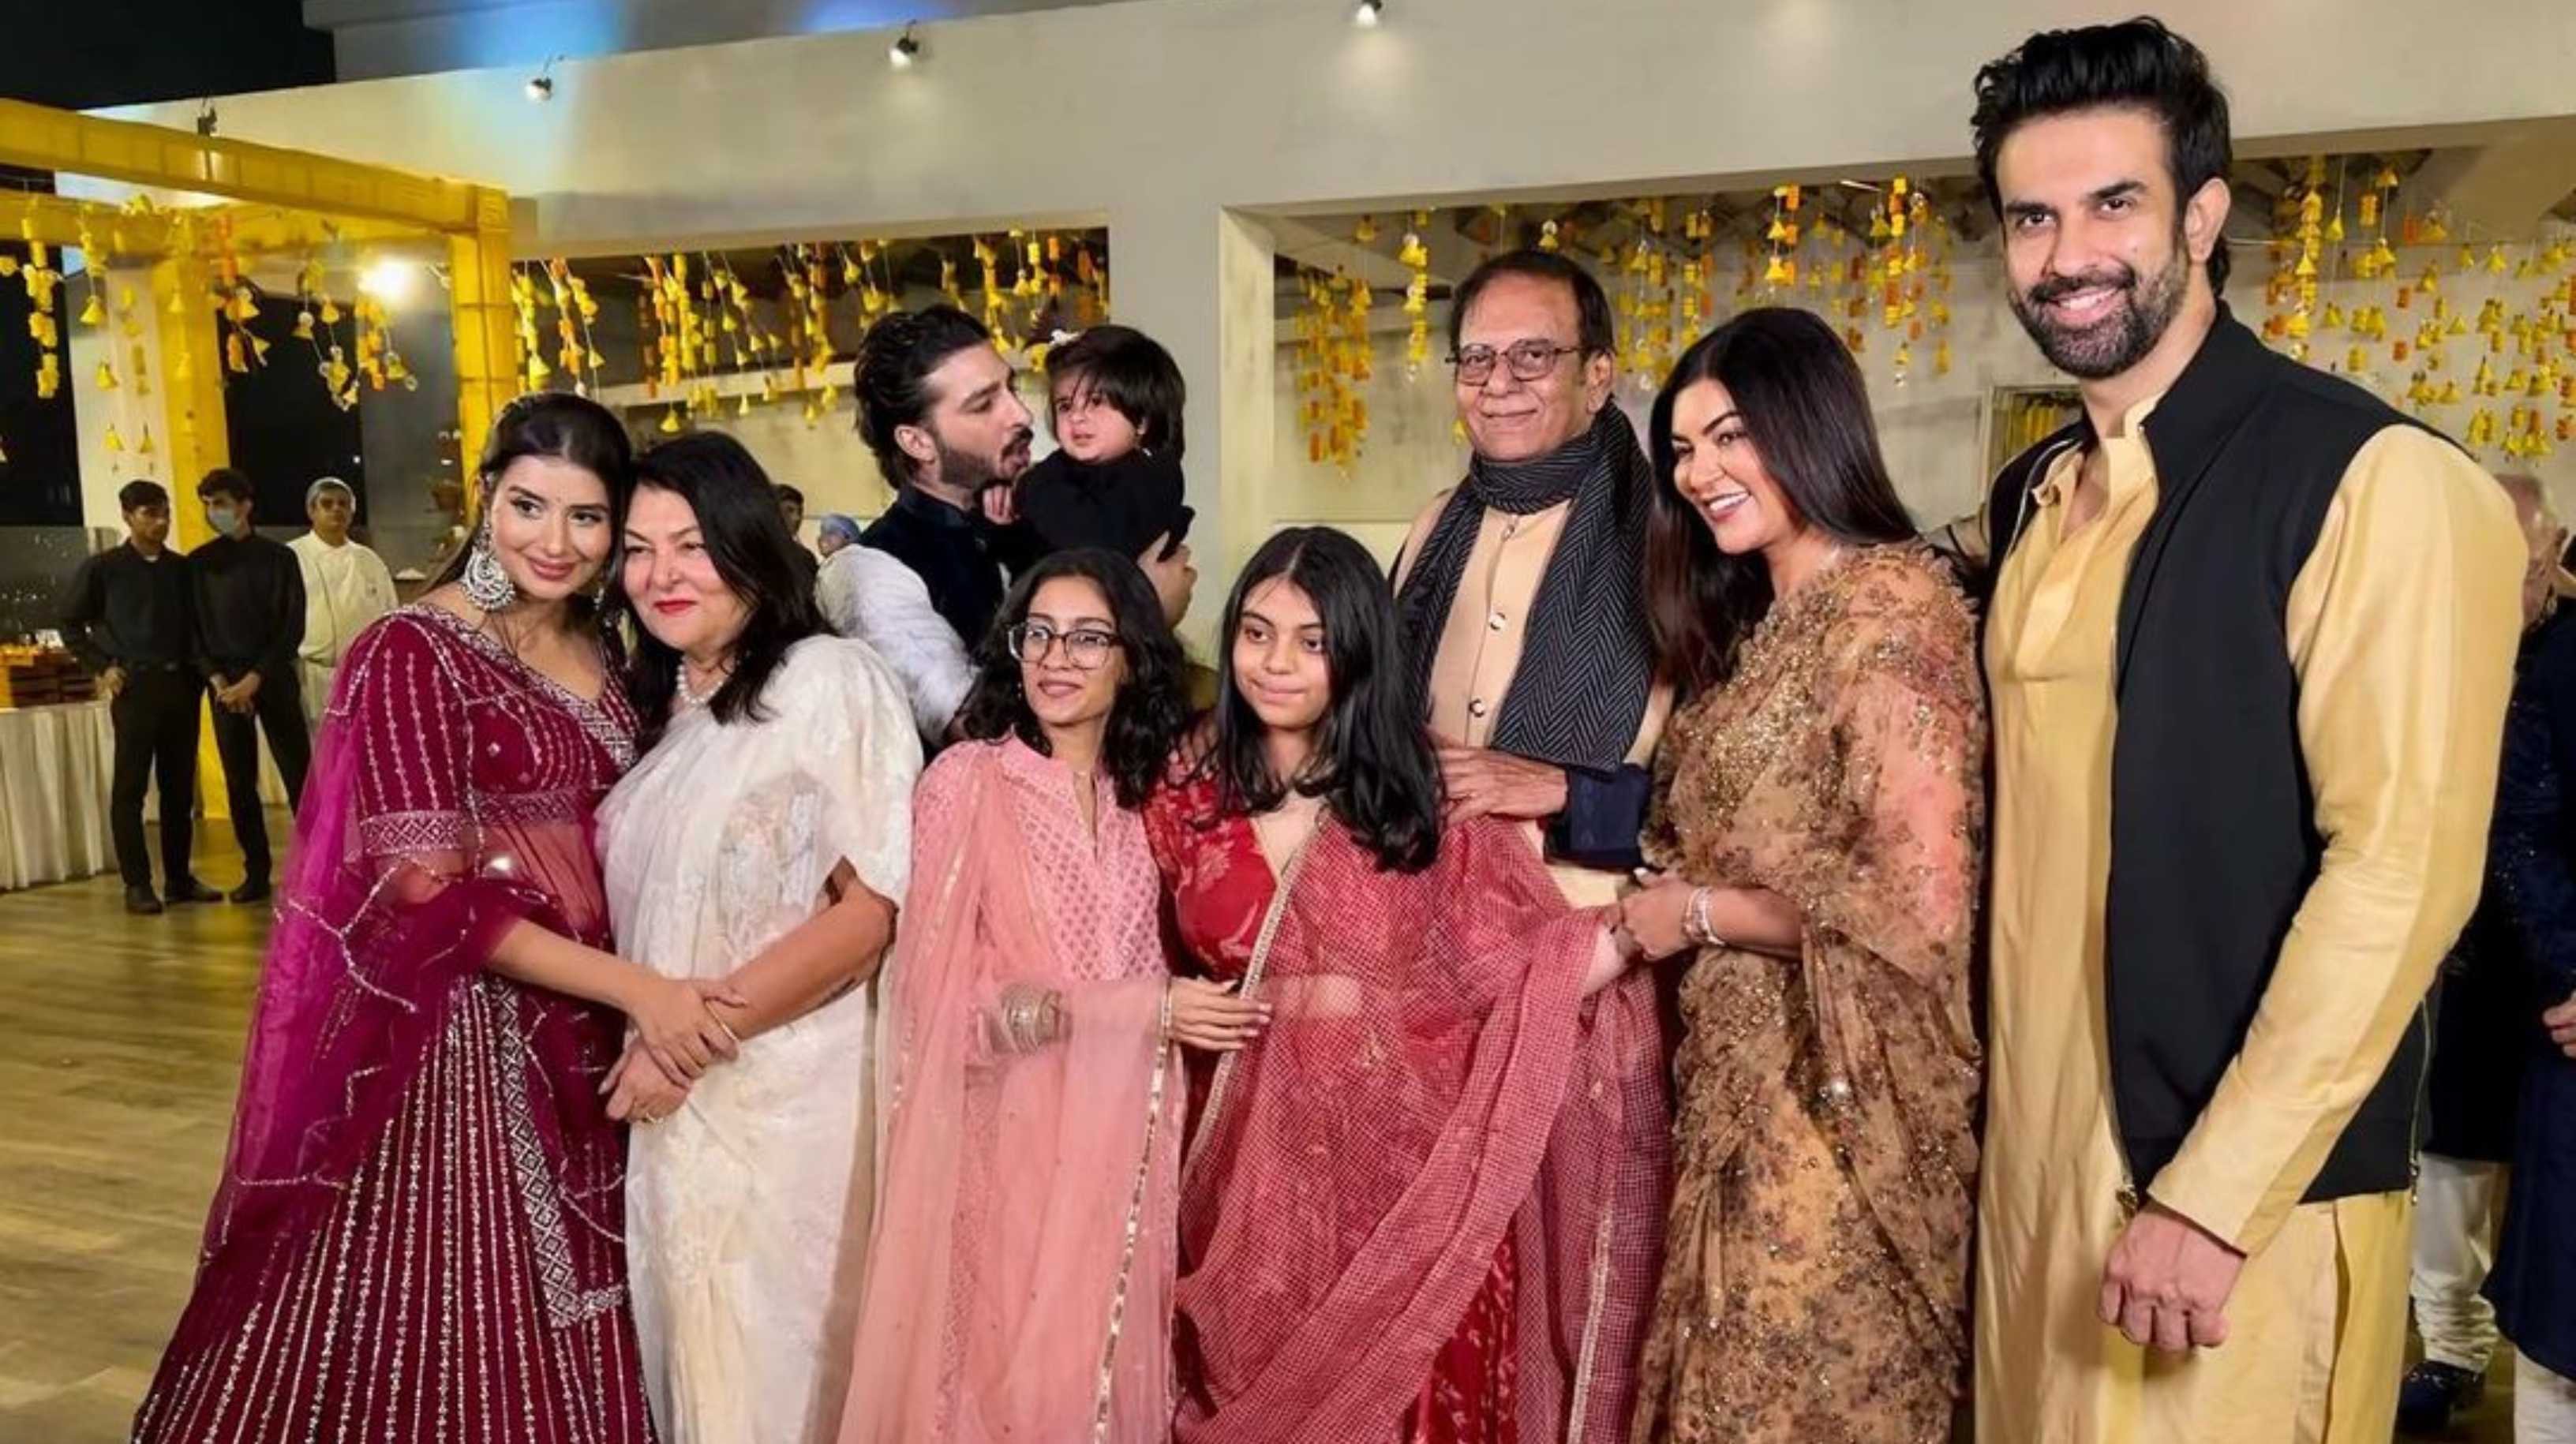 Sushmita Sen and Rohman Shawl attend a wedding with Rajeev Sen & Charu Asopa; netizens root for them to patch up